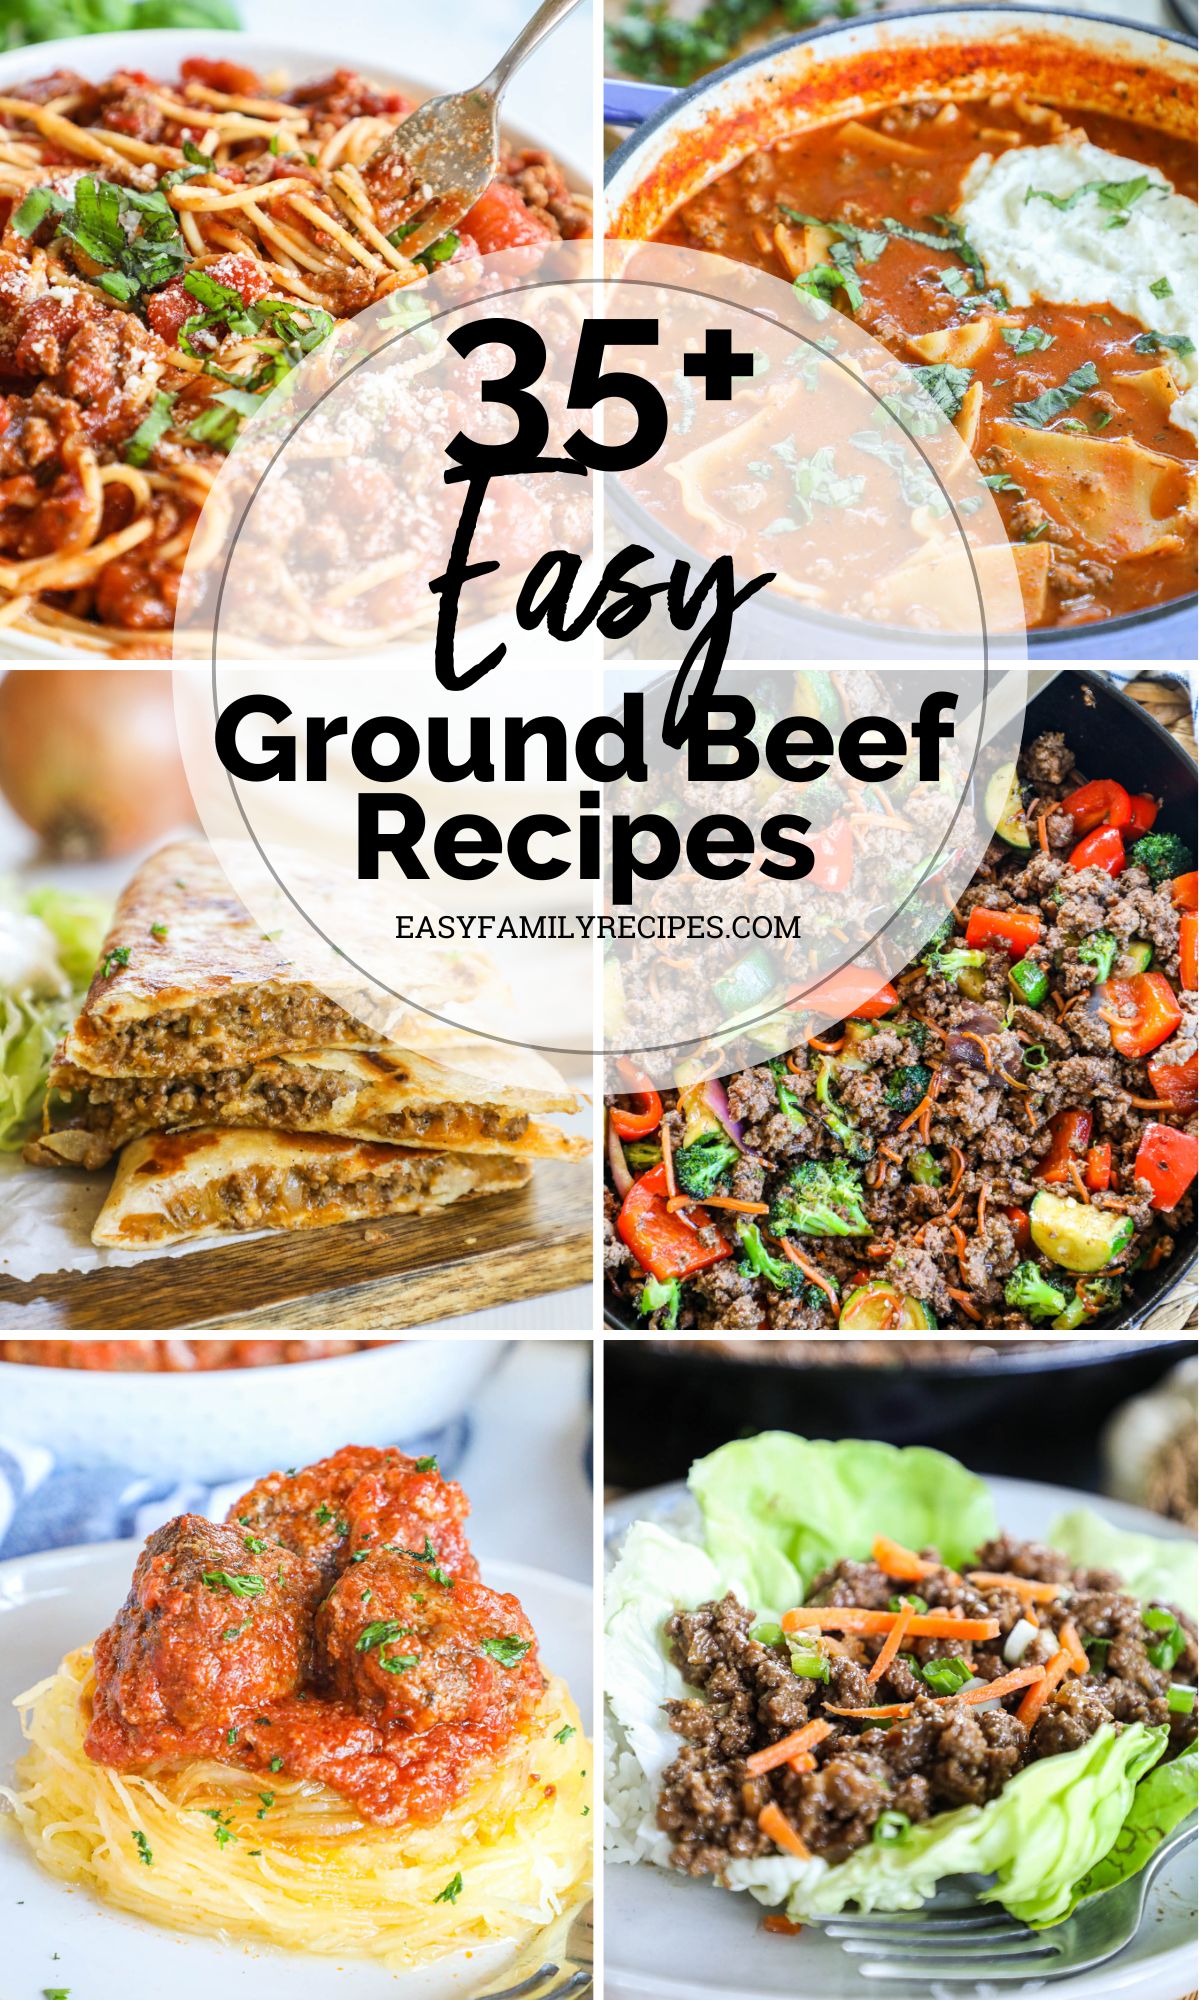 35+ Easy Ground Beef Recipes with a Few Ingredients · Easy Family Recipes